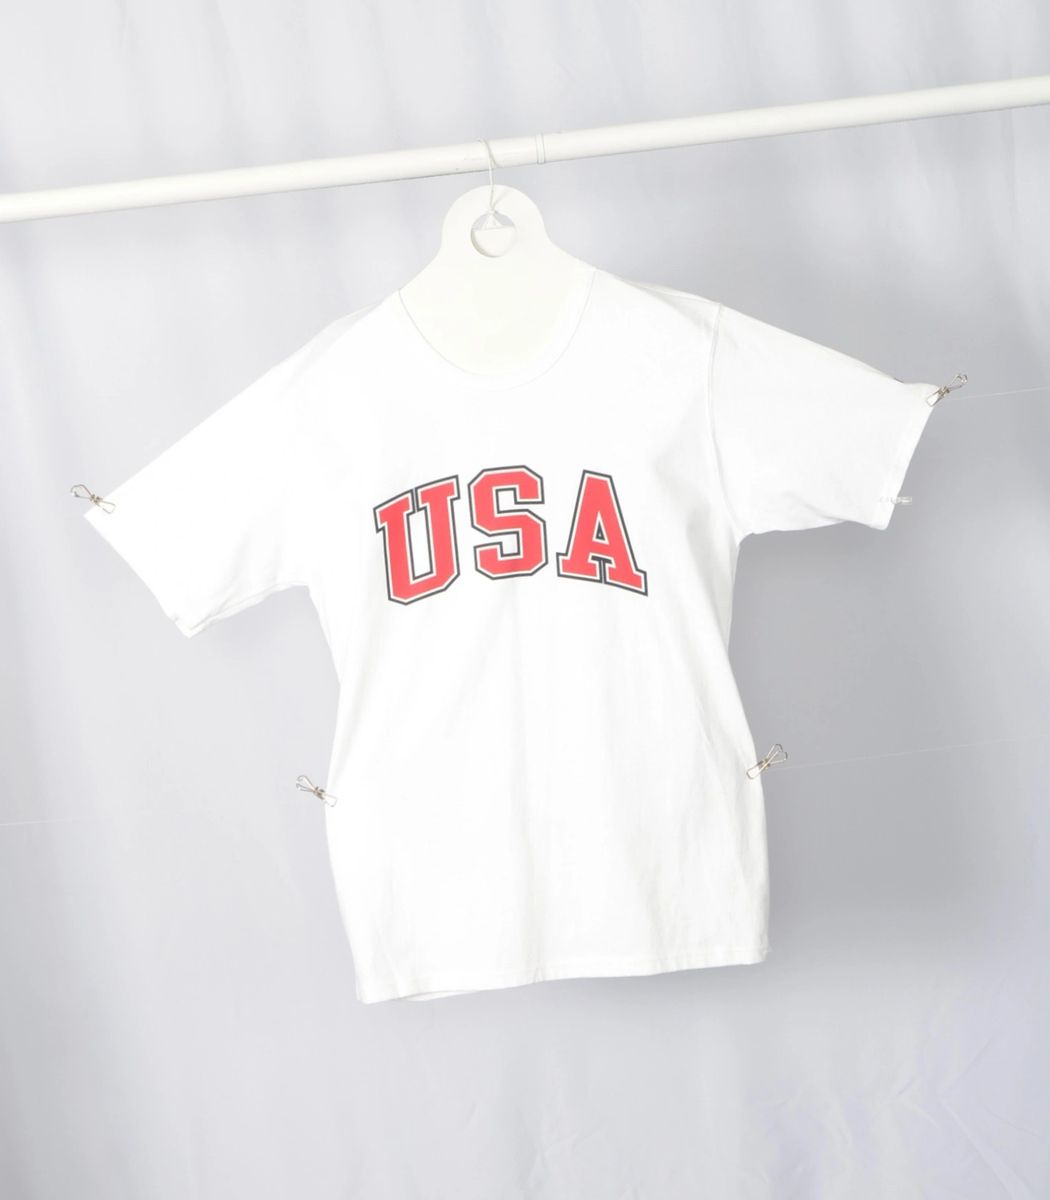 Champion Team USA SS T Shirt, White/Red/Blue, Size to 3XL